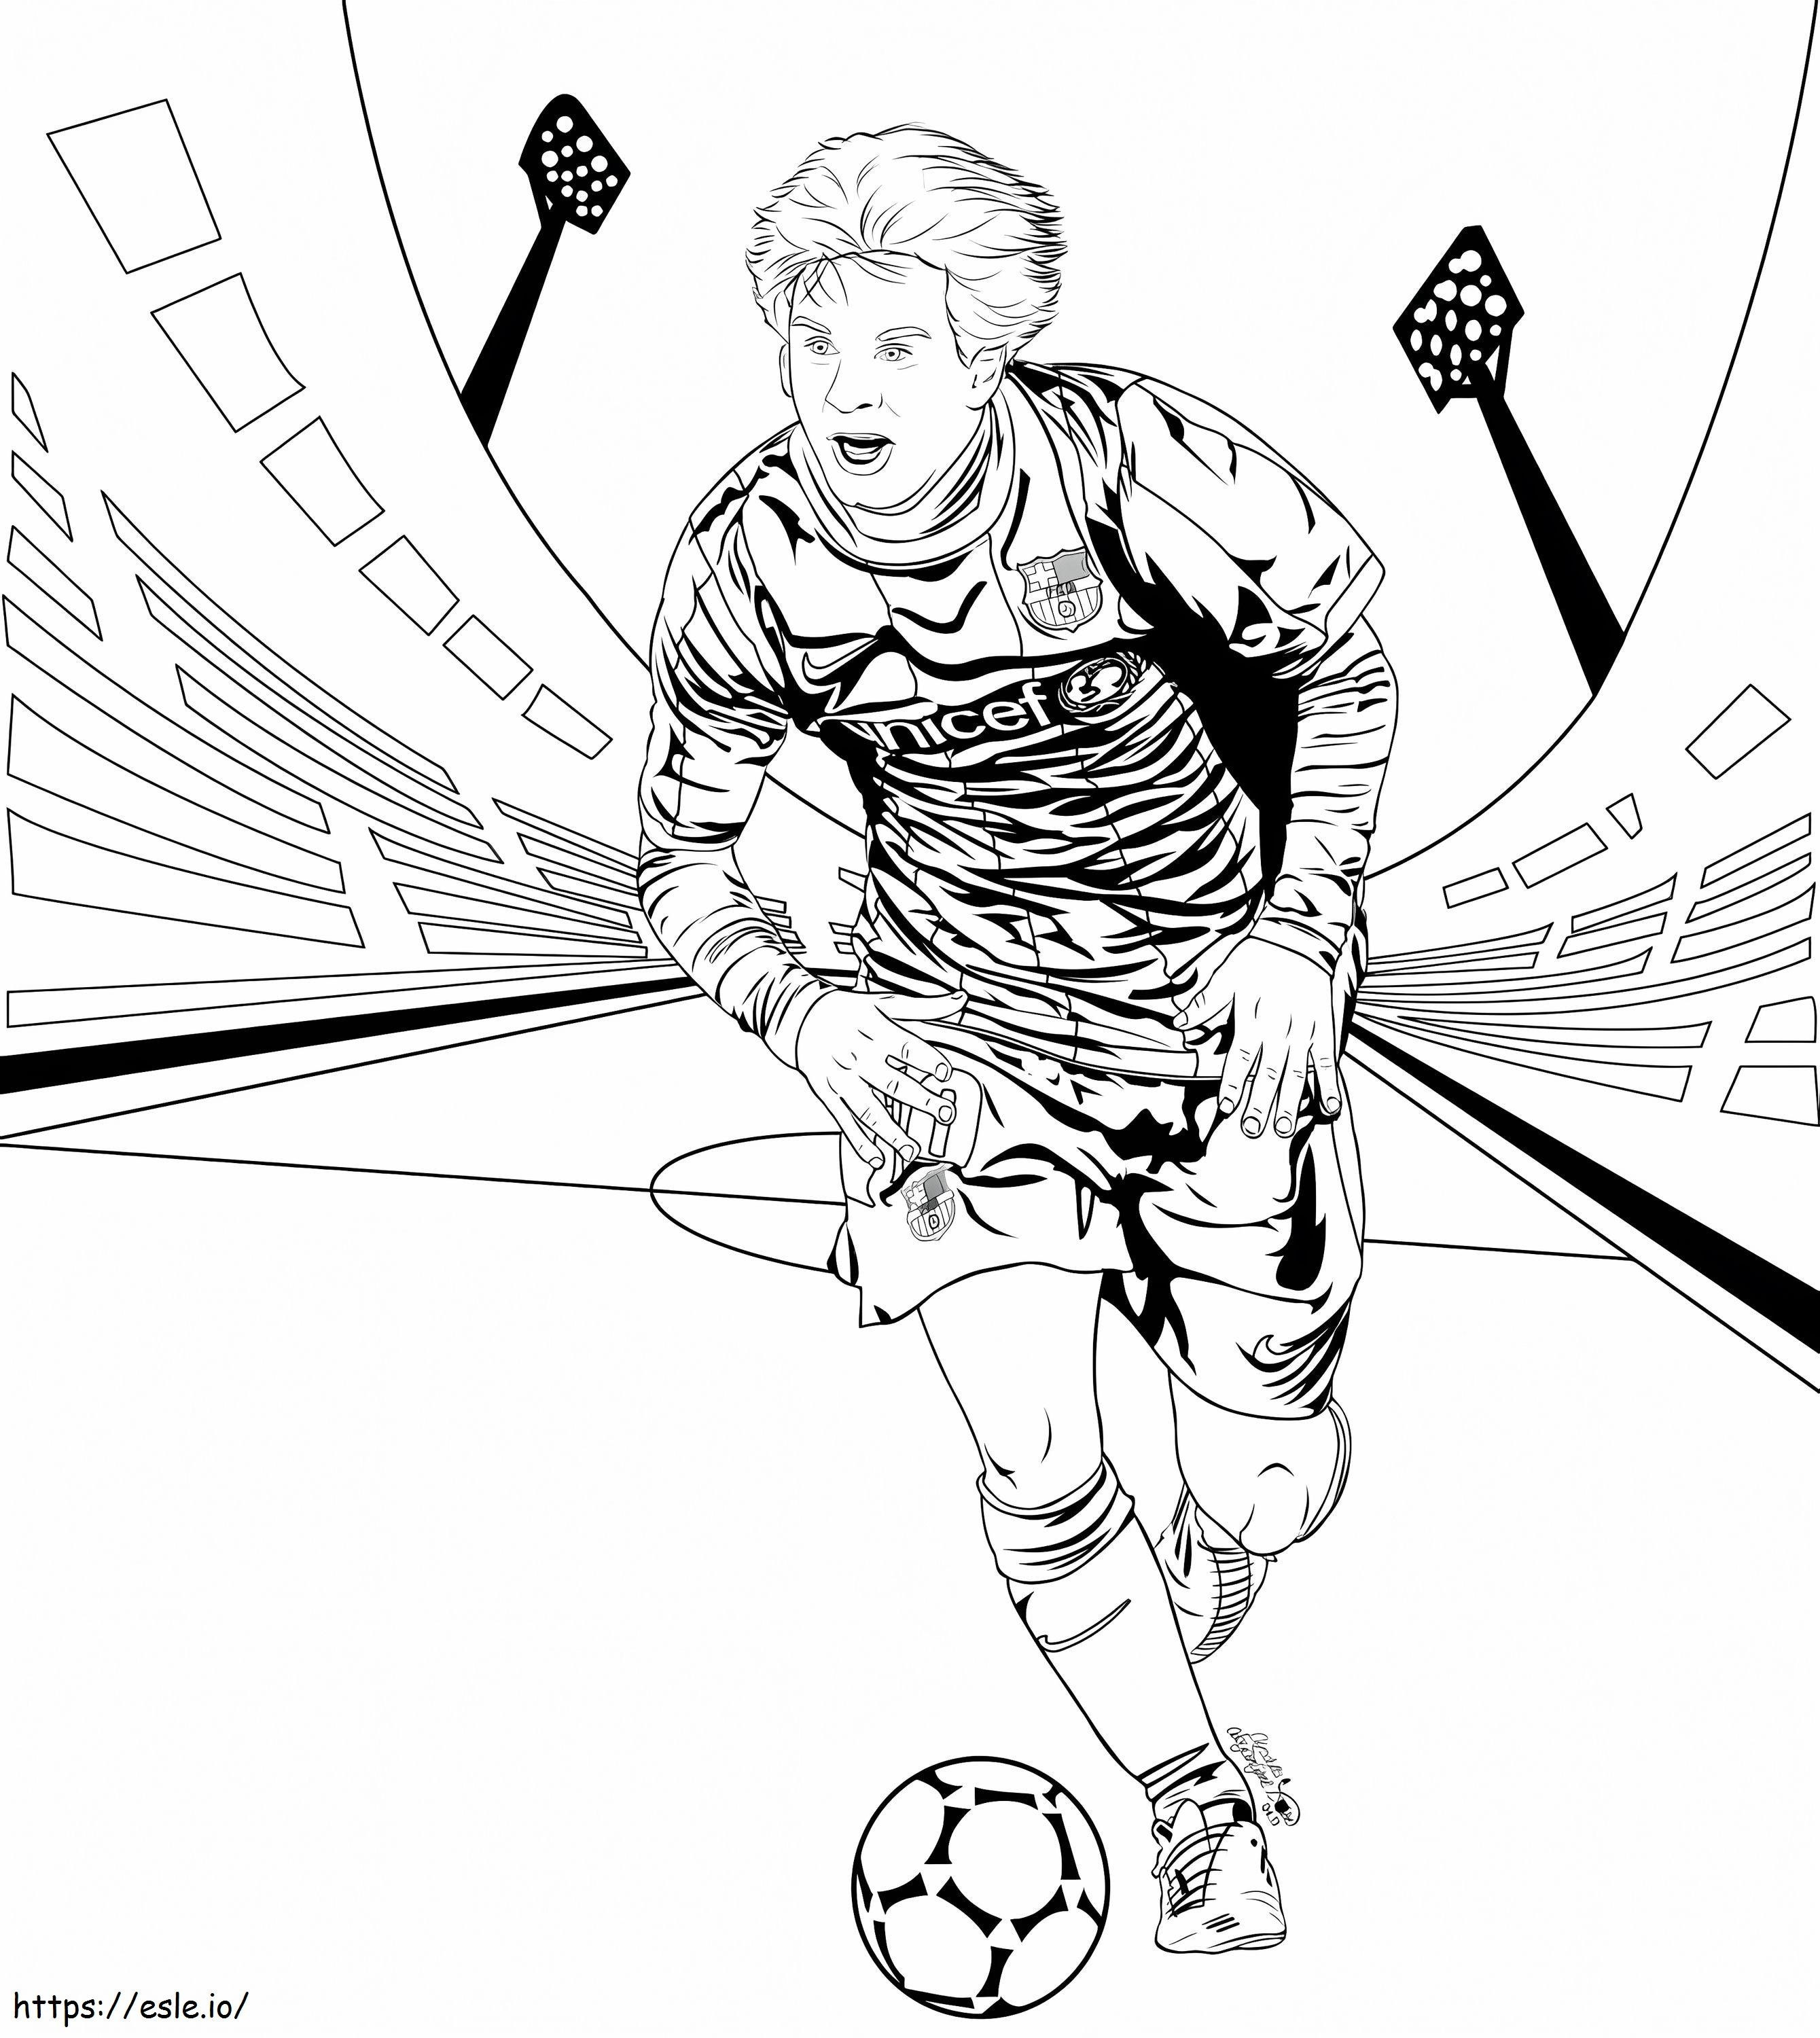 Lionel Messi Playing Soccer coloring page